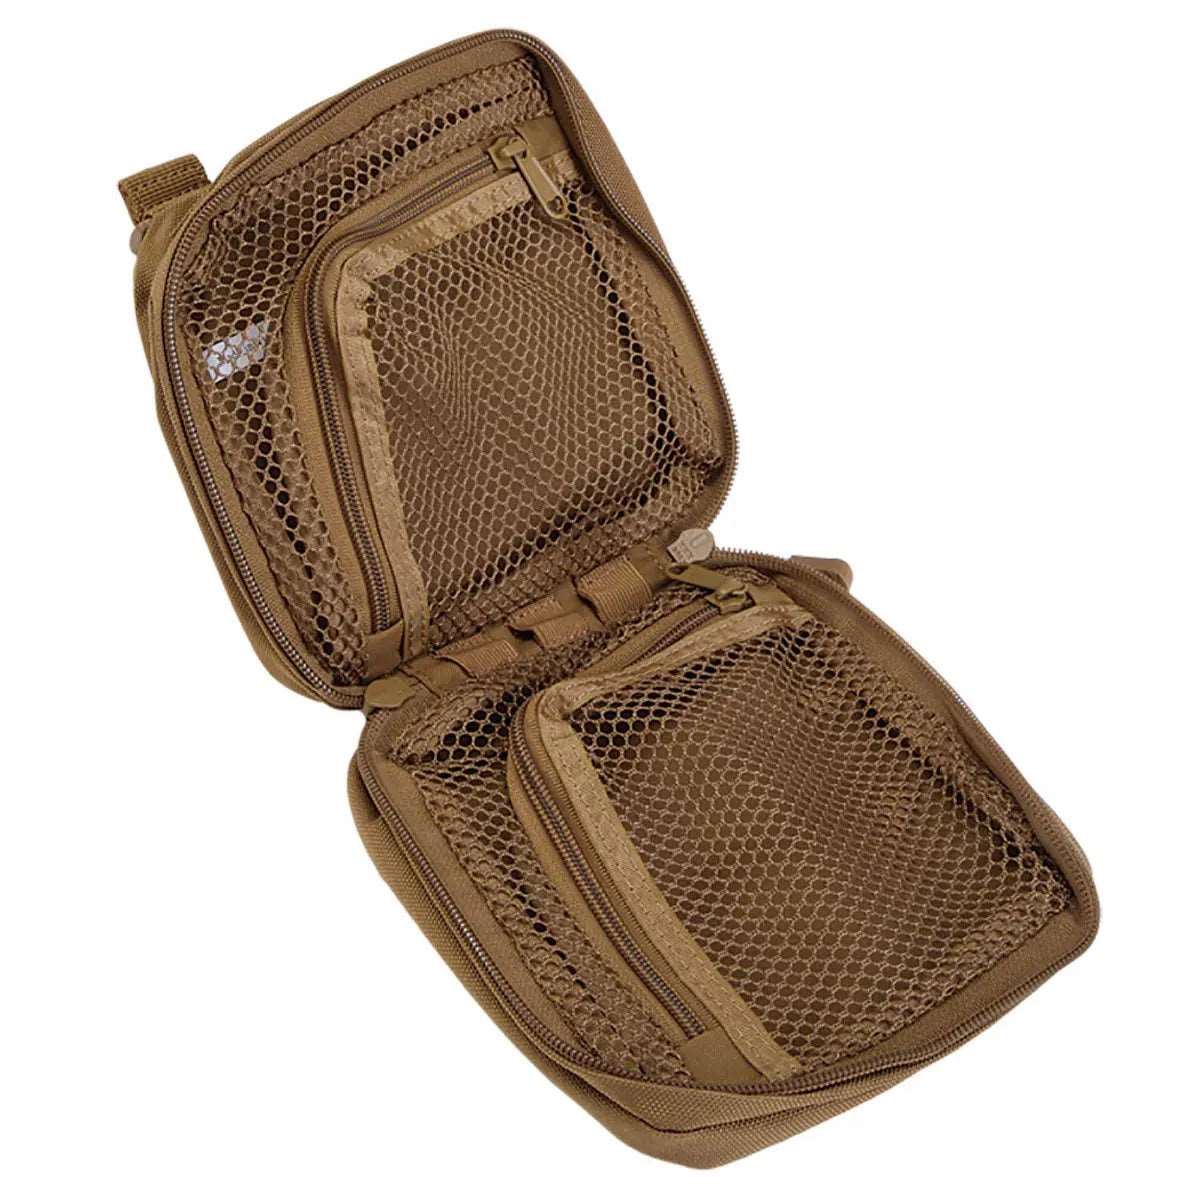 Medical Pouches - 5.11 Tactical 6 X 6 Med Pouch